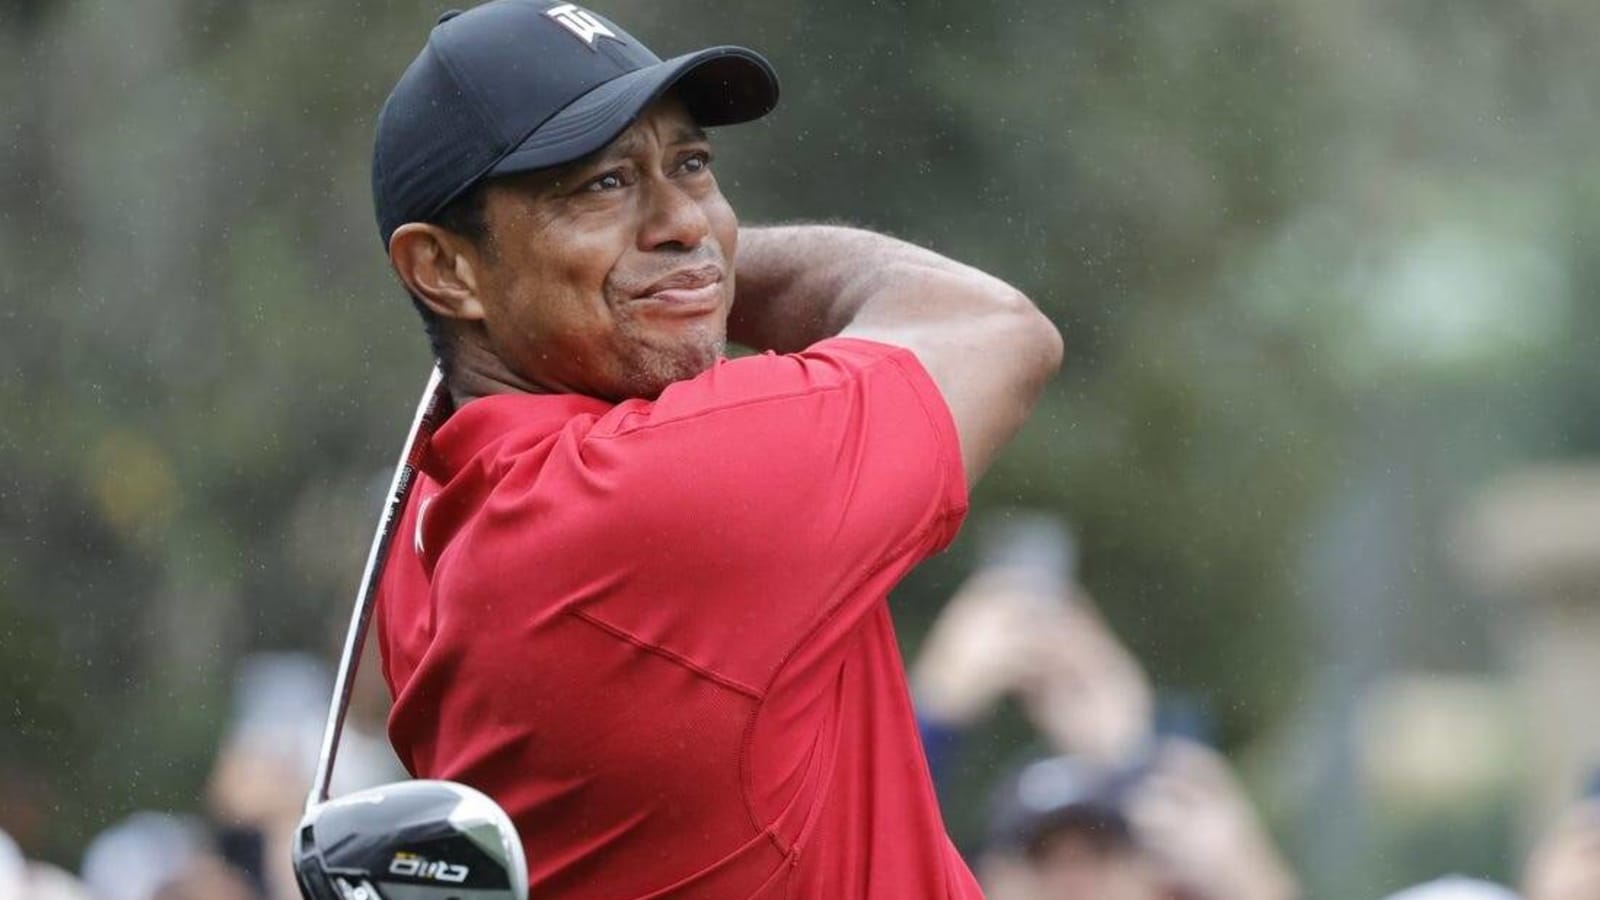 Tiger Woods partners with TaylorMade for new apparel line